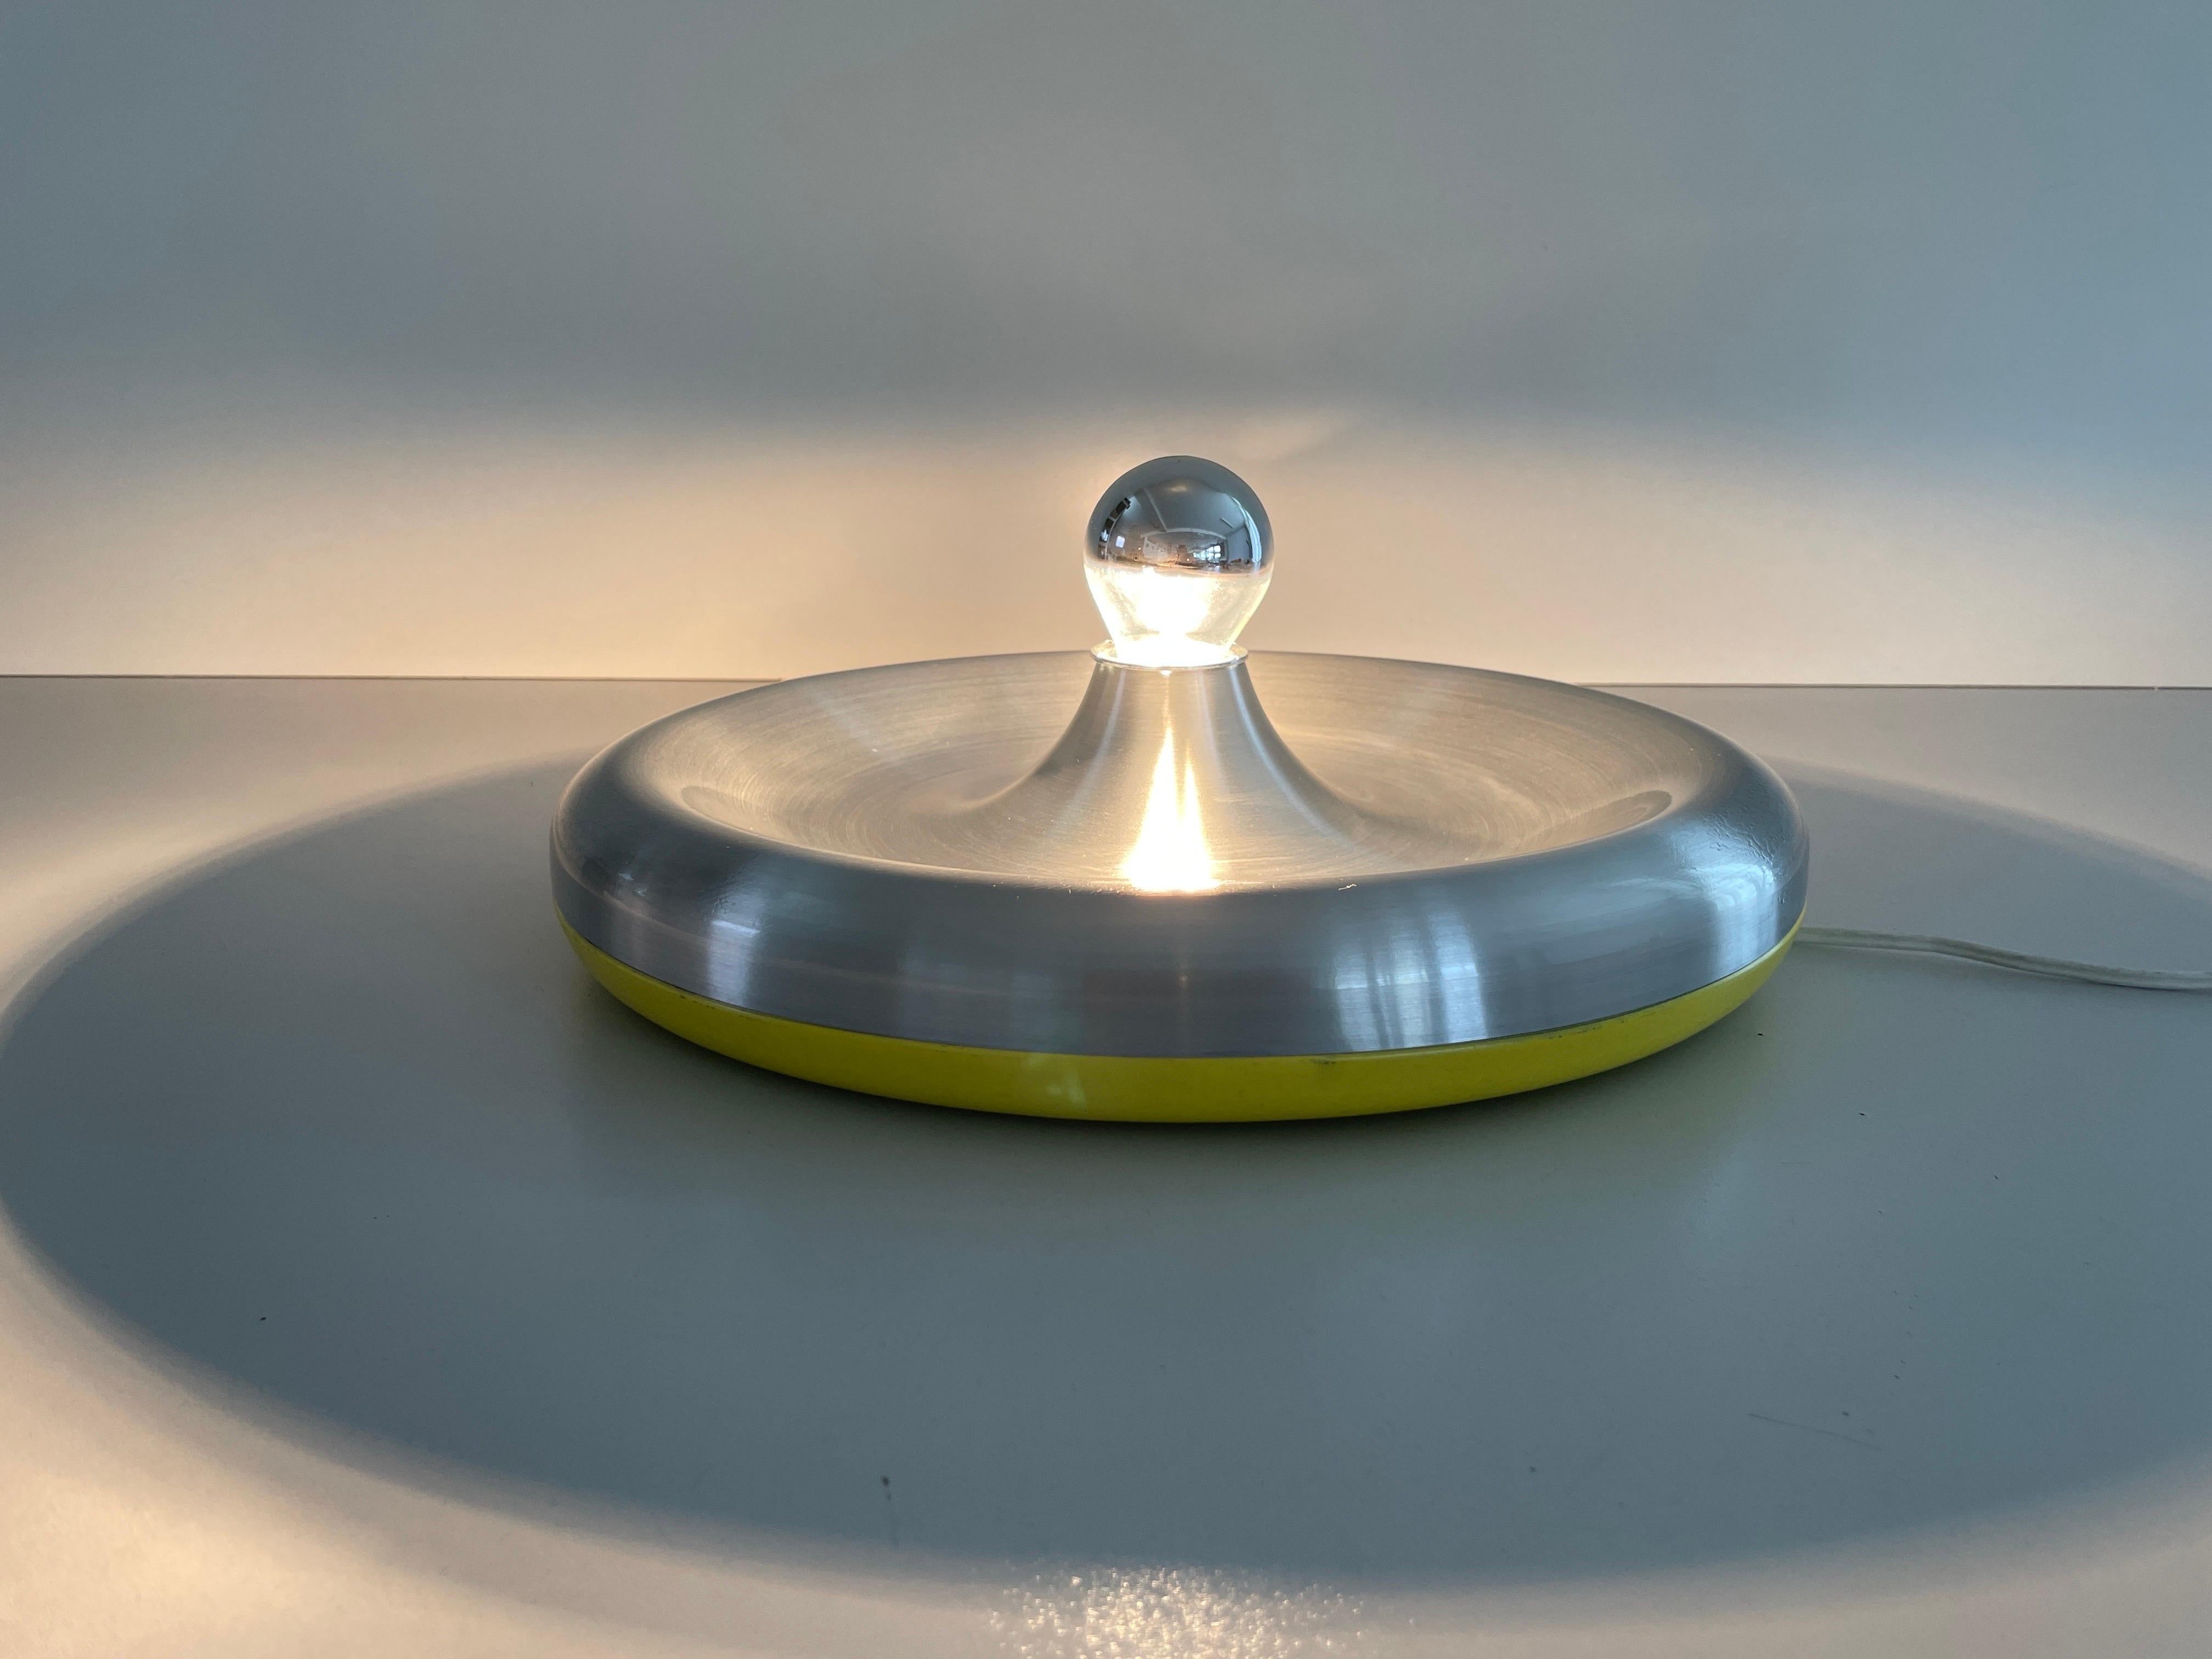 Metallic Grey and Yellow Space Age Flush Mount Ceiling Lamp, 1970s, Germany For Sale 7